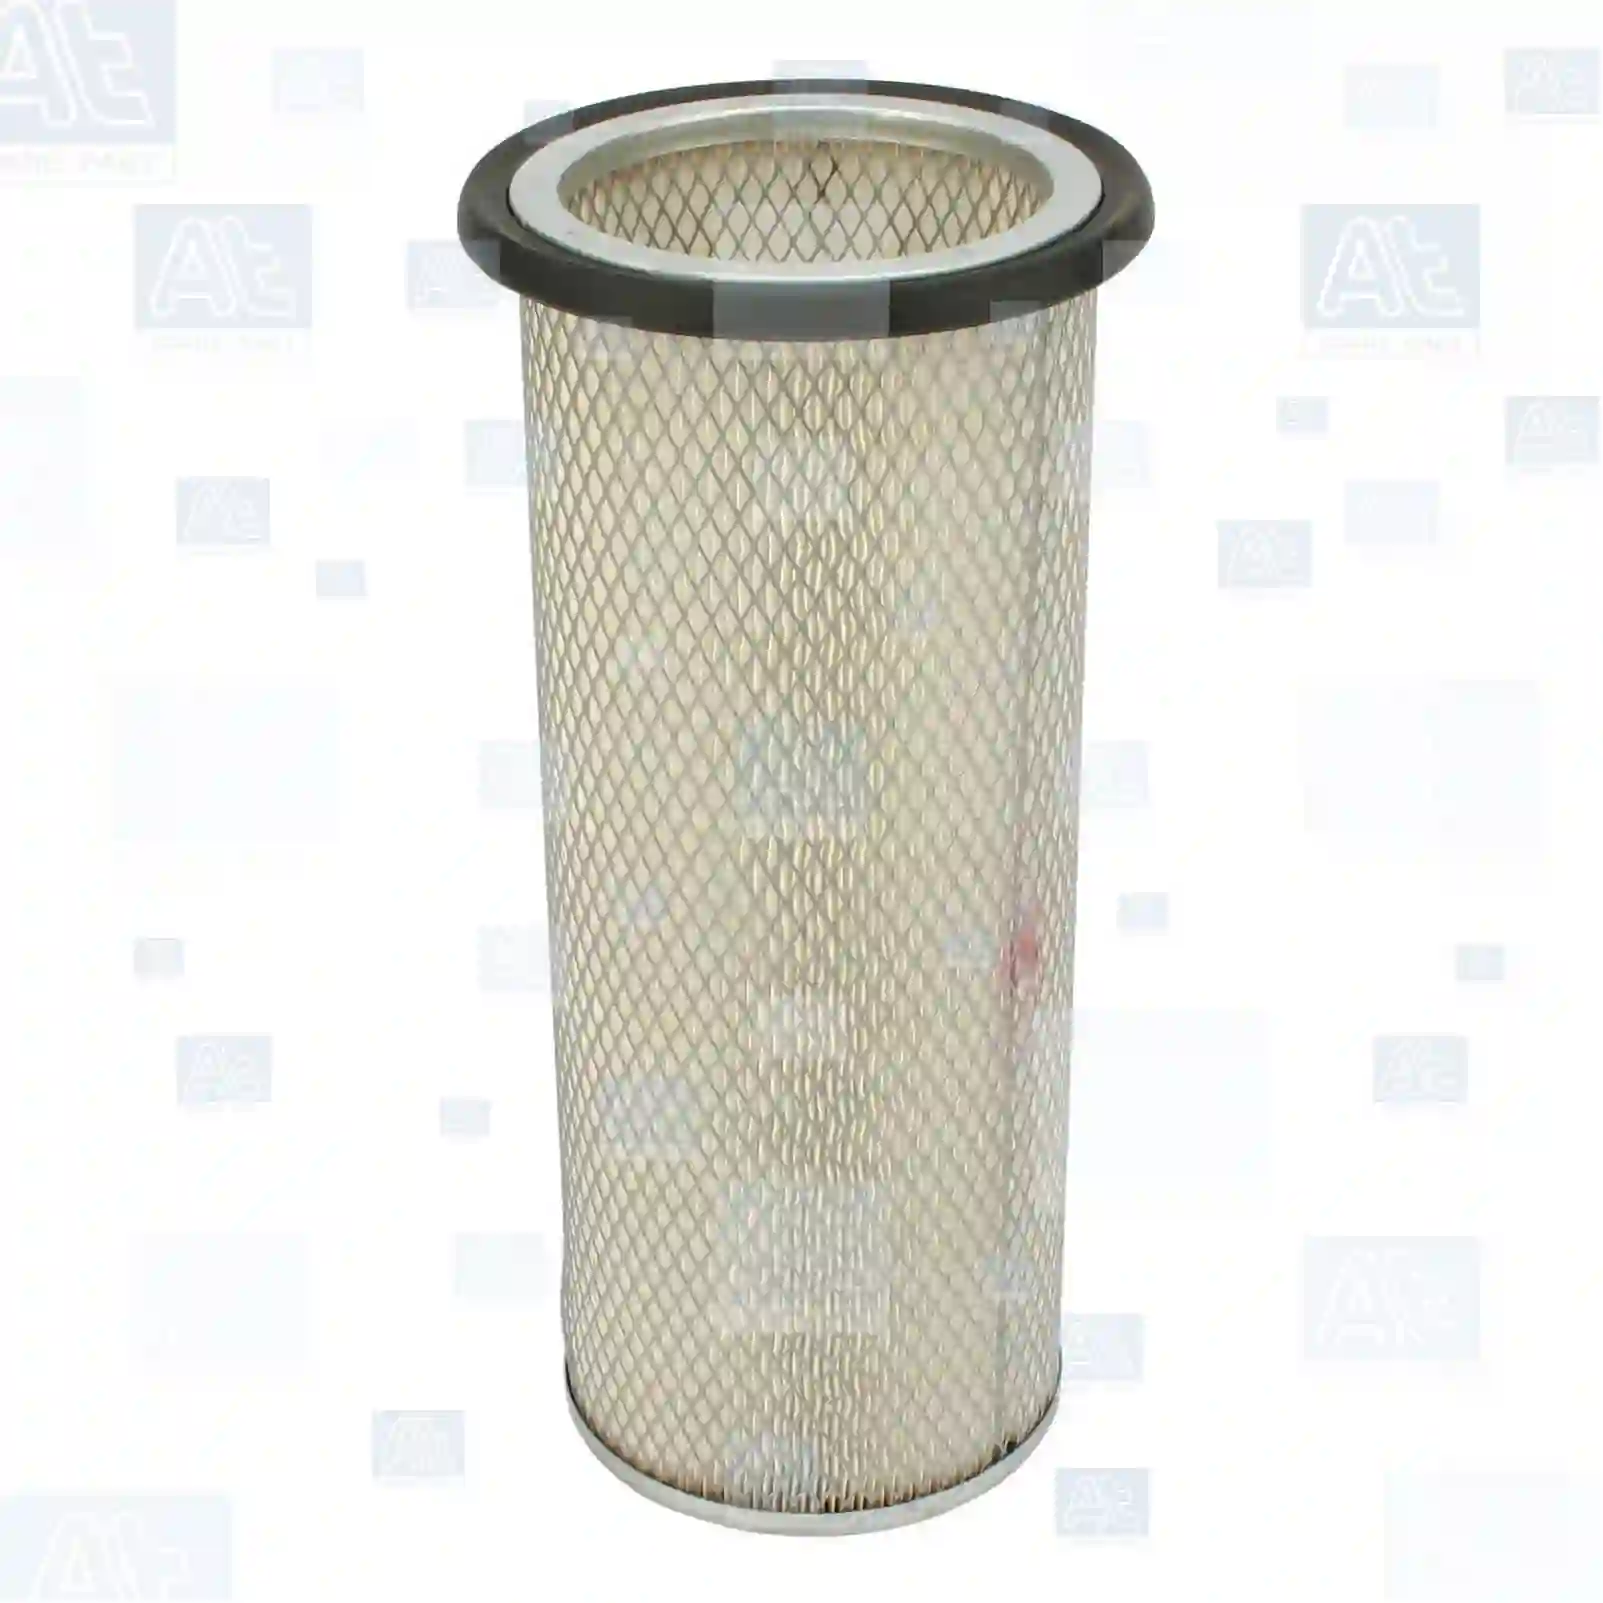 Air filter, inner, 77706037, 6624773, 6624779, 70662471, 70662477, 00104147, 529821R1, 702323C1, 702323C91, 926784C1, L35496, 3I-0126, 77-6258, 8C-3047, 94-6081, 9Y-6804, J3564119, 204639, 3013209, 3325291, 44749049, 447490498, 44749049S, RDK6220, 02352343, 6953106, 963533, 00104147, 00662477, 01849107, 01930248, 01930748, 07662477, 08721029, 321549250, 708721029, 70662447, 70662477, 76040385, 77662477, 78721029, 79043781, Y05811009, 276767, DNP119373, 6487136, 9304100074, 178011090, 178011090A, 346320100, 1930748, 4337639, 502827, L4085788, L4337639, 7000311343, 1-14215033-0, 1-14215034-0, 6-00181423-0, 9-14215034-0, 01930748, 08016966, 1930748, 70662477, AT131683, AT166136, U44956, 34000330, 40247-7900, 7010578, 7362687, 2191P119373, 08108304005, 55508304015, 56084040507, 81083040050, 1070230M1, 1089937M91, 525612M1, 0030941304, 3000940304, AE063155, ME063155, 16545-96019, 16546-96014, PI02739, 0003564119, 0003564138, 5000890293, 6005019714, R637S, 41017301, 142004, 310814, 3291796R1, 9377816, 1654696014, 1654696125S, 1654696126, 1654699226S, 1654699512, 16546CW40S, 16546NB00K, 16546NB01JS, 5051A103, 10562958, SH12254, 1911724, 20002266390, 475082, 6239143, 79384780, 12665412620 ||  77706037 At Spare Part | Engine, Accelerator Pedal, Camshaft, Connecting Rod, Crankcase, Crankshaft, Cylinder Head, Engine Suspension Mountings, Exhaust Manifold, Exhaust Gas Recirculation, Filter Kits, Flywheel Housing, General Overhaul Kits, Engine, Intake Manifold, Oil Cleaner, Oil Cooler, Oil Filter, Oil Pump, Oil Sump, Piston & Liner, Sensor & Switch, Timing Case, Turbocharger, Cooling System, Belt Tensioner, Coolant Filter, Coolant Pipe, Corrosion Prevention Agent, Drive, Expansion Tank, Fan, Intercooler, Monitors & Gauges, Radiator, Thermostat, V-Belt / Timing belt, Water Pump, Fuel System, Electronical Injector Unit, Feed Pump, Fuel Filter, cpl., Fuel Gauge Sender,  Fuel Line, Fuel Pump, Fuel Tank, Injection Line Kit, Injection Pump, Exhaust System, Clutch & Pedal, Gearbox, Propeller Shaft, Axles, Brake System, Hubs & Wheels, Suspension, Leaf Spring, Universal Parts / Accessories, Steering, Electrical System, Cabin Air filter, inner, 77706037, 6624773, 6624779, 70662471, 70662477, 00104147, 529821R1, 702323C1, 702323C91, 926784C1, L35496, 3I-0126, 77-6258, 8C-3047, 94-6081, 9Y-6804, J3564119, 204639, 3013209, 3325291, 44749049, 447490498, 44749049S, RDK6220, 02352343, 6953106, 963533, 00104147, 00662477, 01849107, 01930248, 01930748, 07662477, 08721029, 321549250, 708721029, 70662447, 70662477, 76040385, 77662477, 78721029, 79043781, Y05811009, 276767, DNP119373, 6487136, 9304100074, 178011090, 178011090A, 346320100, 1930748, 4337639, 502827, L4085788, L4337639, 7000311343, 1-14215033-0, 1-14215034-0, 6-00181423-0, 9-14215034-0, 01930748, 08016966, 1930748, 70662477, AT131683, AT166136, U44956, 34000330, 40247-7900, 7010578, 7362687, 2191P119373, 08108304005, 55508304015, 56084040507, 81083040050, 1070230M1, 1089937M91, 525612M1, 0030941304, 3000940304, AE063155, ME063155, 16545-96019, 16546-96014, PI02739, 0003564119, 0003564138, 5000890293, 6005019714, R637S, 41017301, 142004, 310814, 3291796R1, 9377816, 1654696014, 1654696125S, 1654696126, 1654699226S, 1654699512, 16546CW40S, 16546NB00K, 16546NB01JS, 5051A103, 10562958, SH12254, 1911724, 20002266390, 475082, 6239143, 79384780, 12665412620 ||  77706037 At Spare Part | Engine, Accelerator Pedal, Camshaft, Connecting Rod, Crankcase, Crankshaft, Cylinder Head, Engine Suspension Mountings, Exhaust Manifold, Exhaust Gas Recirculation, Filter Kits, Flywheel Housing, General Overhaul Kits, Engine, Intake Manifold, Oil Cleaner, Oil Cooler, Oil Filter, Oil Pump, Oil Sump, Piston & Liner, Sensor & Switch, Timing Case, Turbocharger, Cooling System, Belt Tensioner, Coolant Filter, Coolant Pipe, Corrosion Prevention Agent, Drive, Expansion Tank, Fan, Intercooler, Monitors & Gauges, Radiator, Thermostat, V-Belt / Timing belt, Water Pump, Fuel System, Electronical Injector Unit, Feed Pump, Fuel Filter, cpl., Fuel Gauge Sender,  Fuel Line, Fuel Pump, Fuel Tank, Injection Line Kit, Injection Pump, Exhaust System, Clutch & Pedal, Gearbox, Propeller Shaft, Axles, Brake System, Hubs & Wheels, Suspension, Leaf Spring, Universal Parts / Accessories, Steering, Electrical System, Cabin